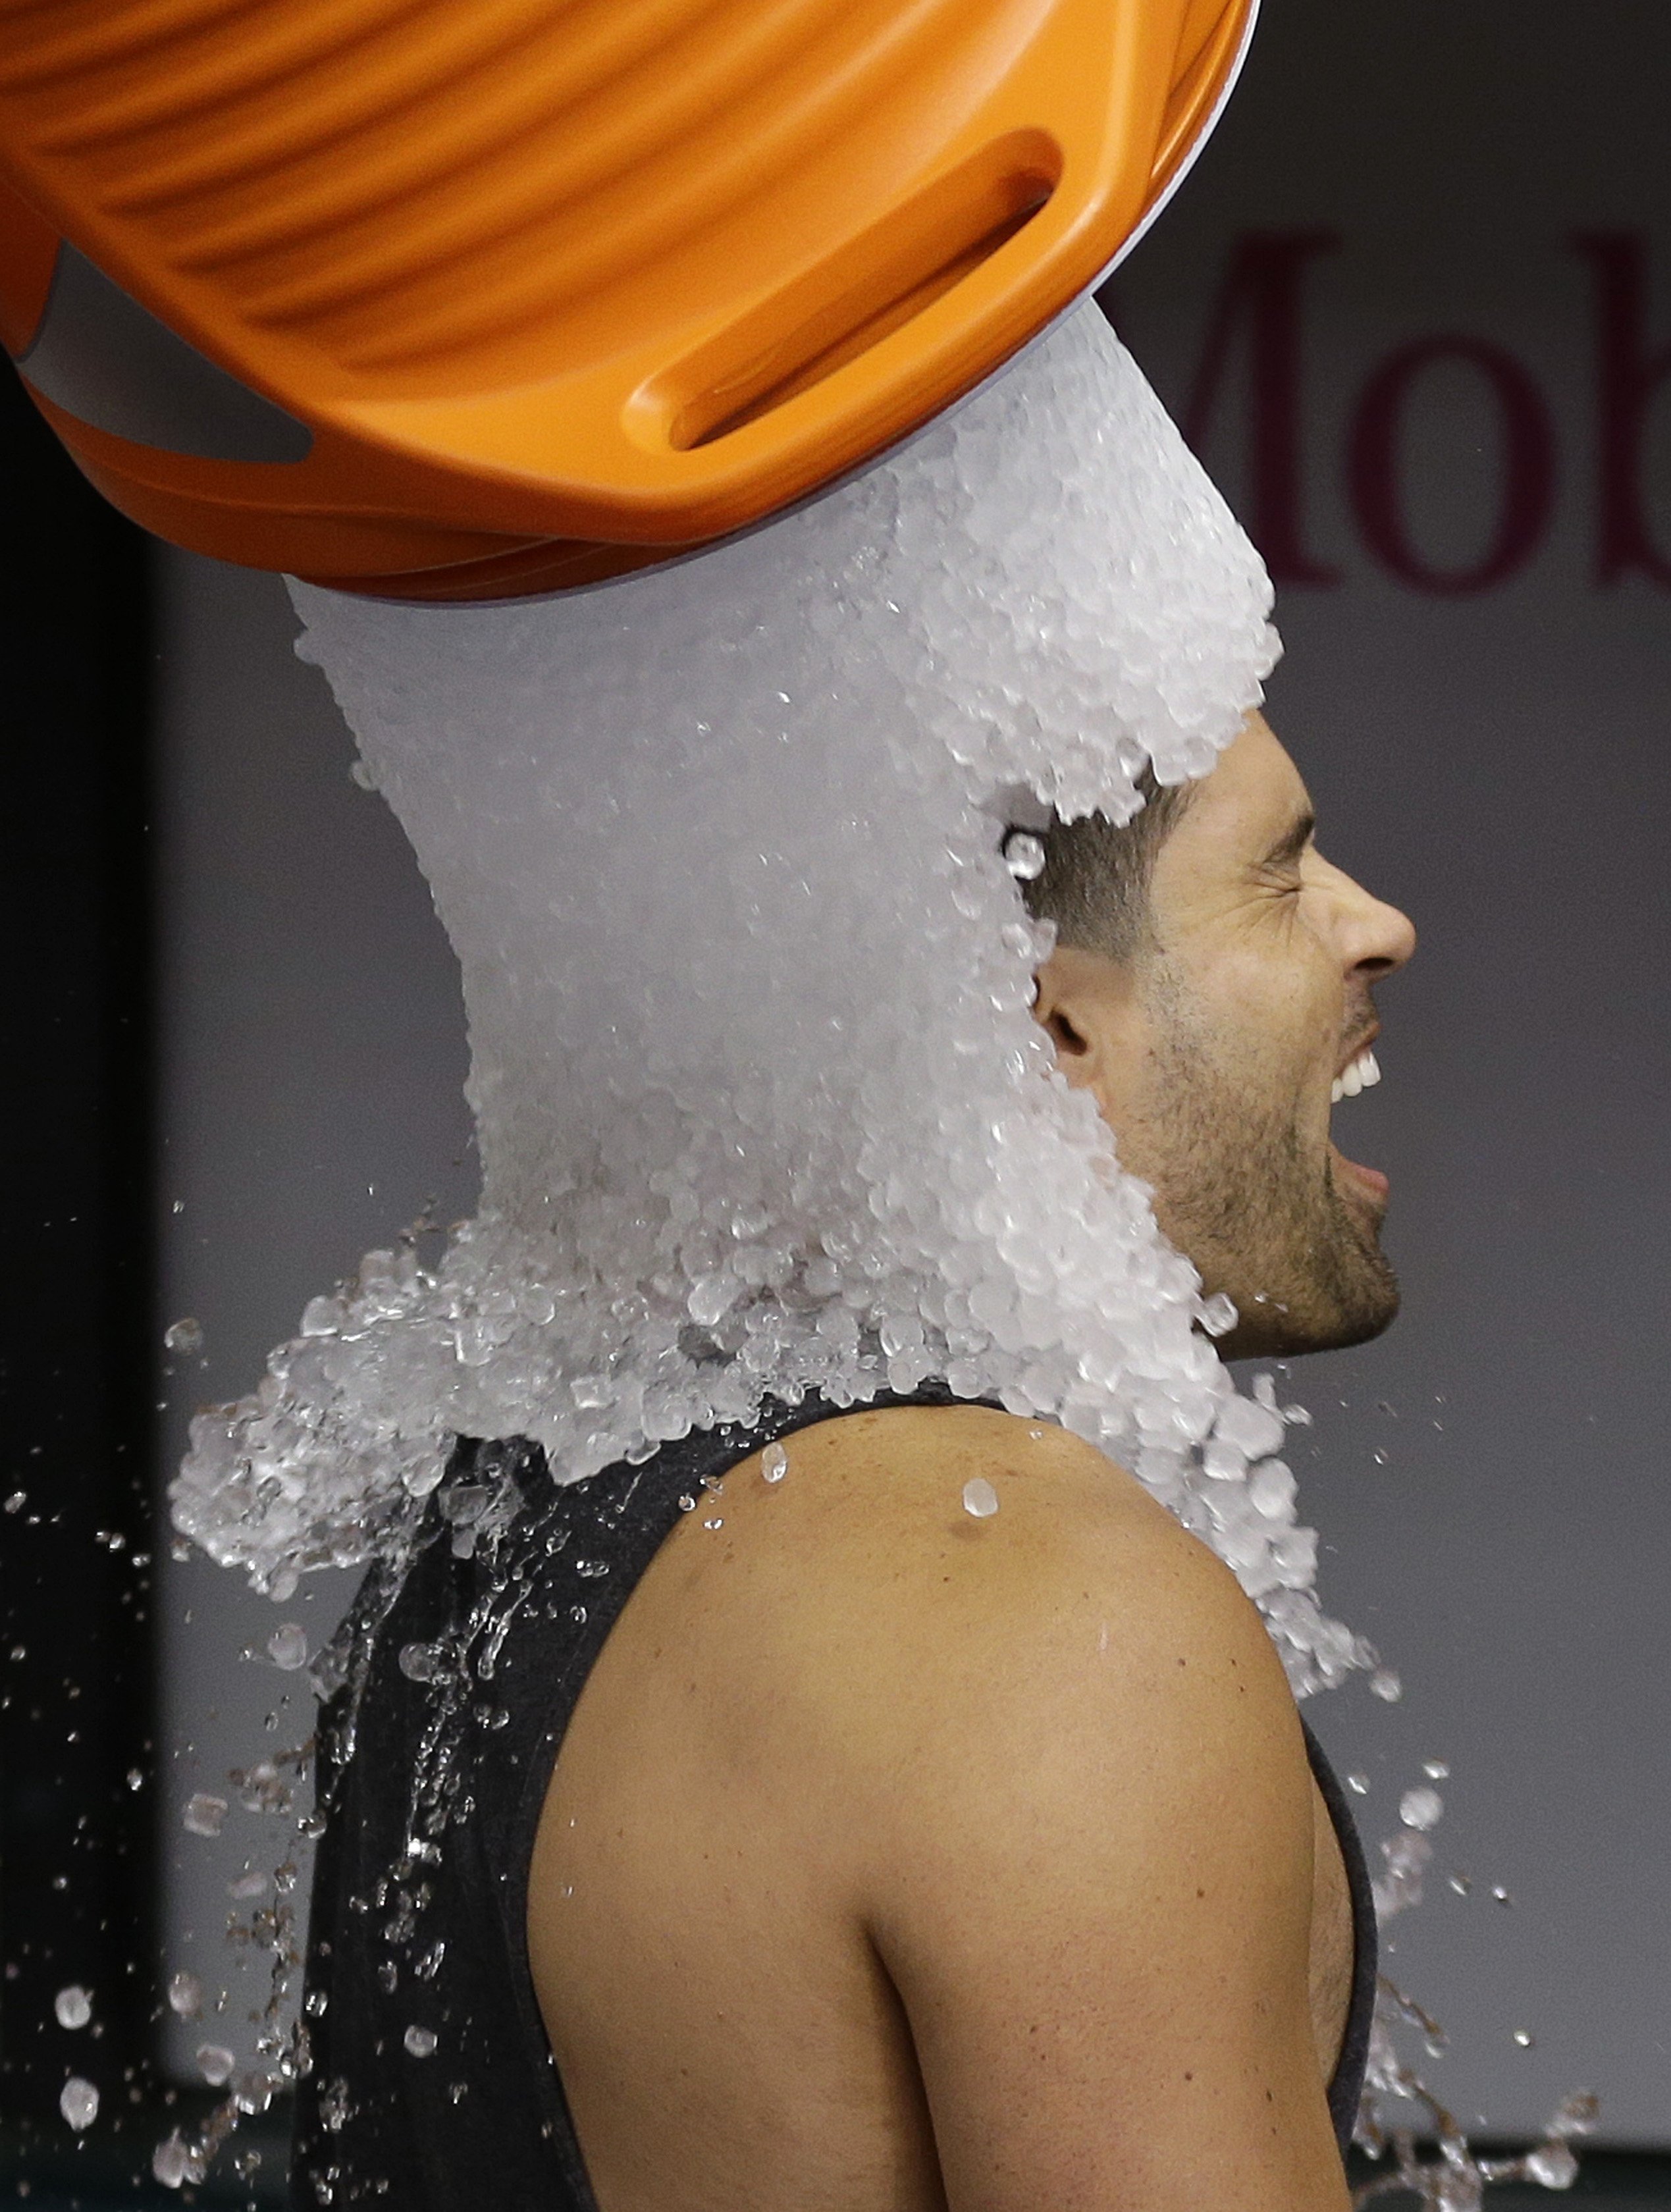 Tampa Bay Rays' David DeJesus gets a bucket of ice dumped on his head from video coordinator Chris Fernandez as part of the ALS Ice Bucket Challenge before a baseball game against the New York Yankees on Aug. 17, 2014, in St. Petersburg, Fla. 